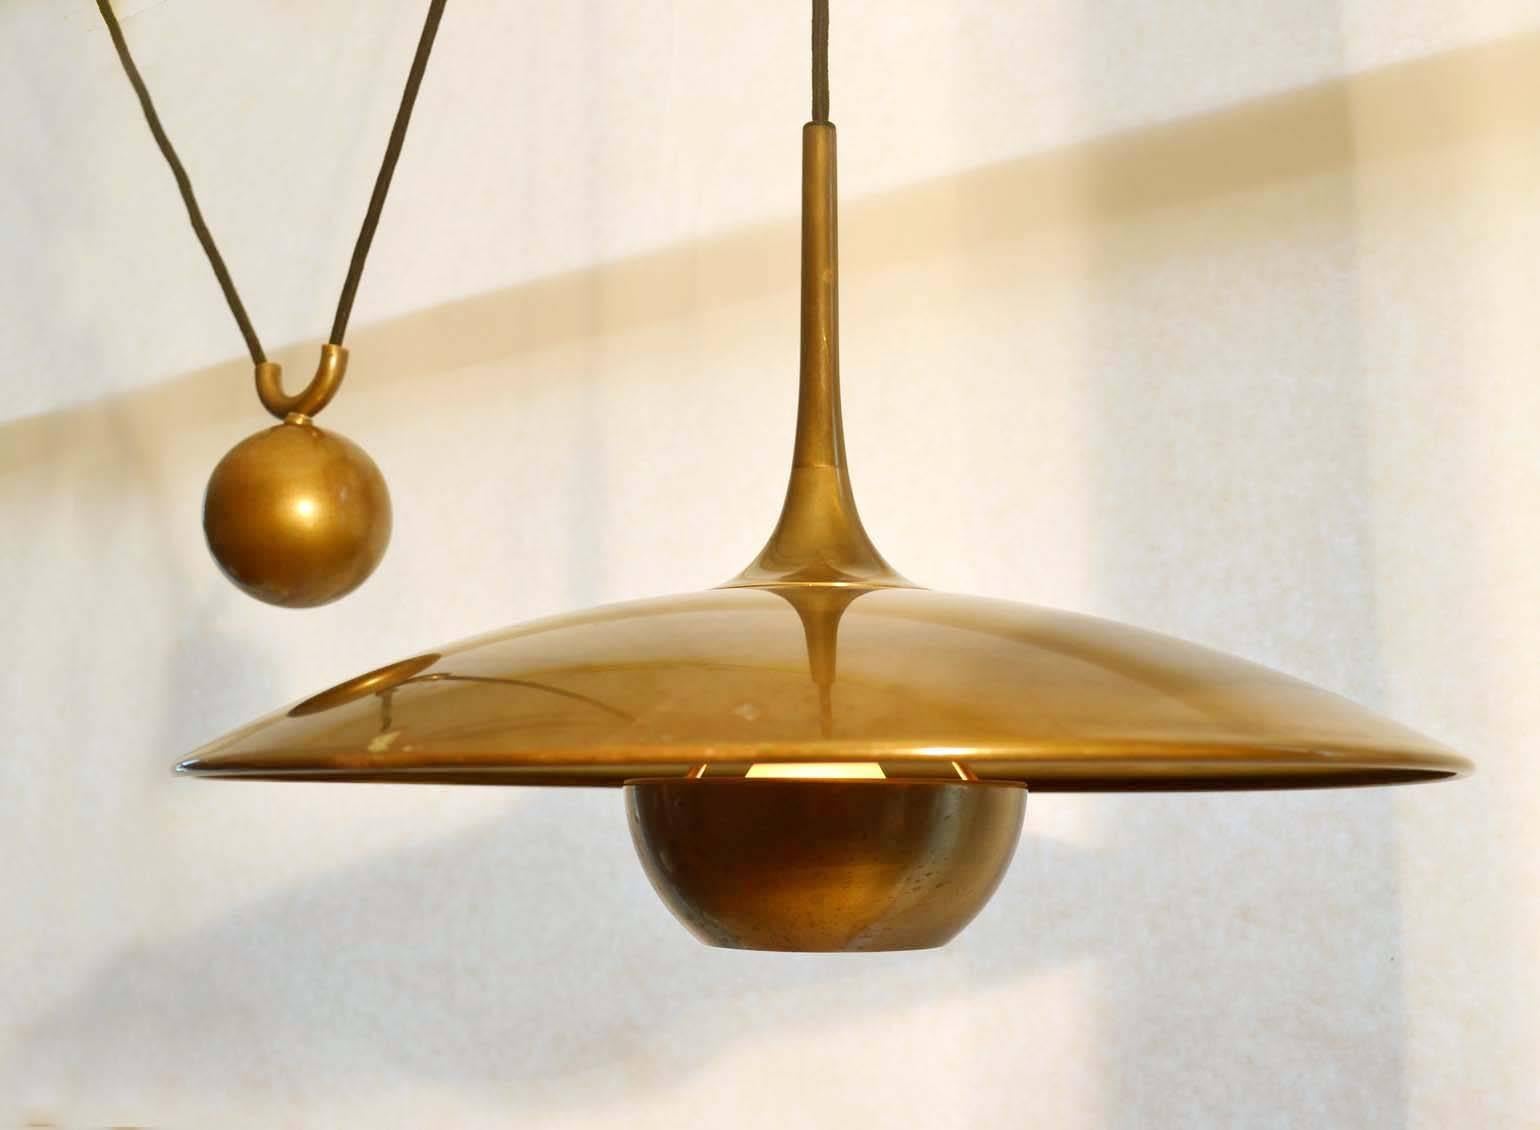 Cast Double Counterbalance Lamps Onos 40 in Brass by Florian Schulz, 1970s